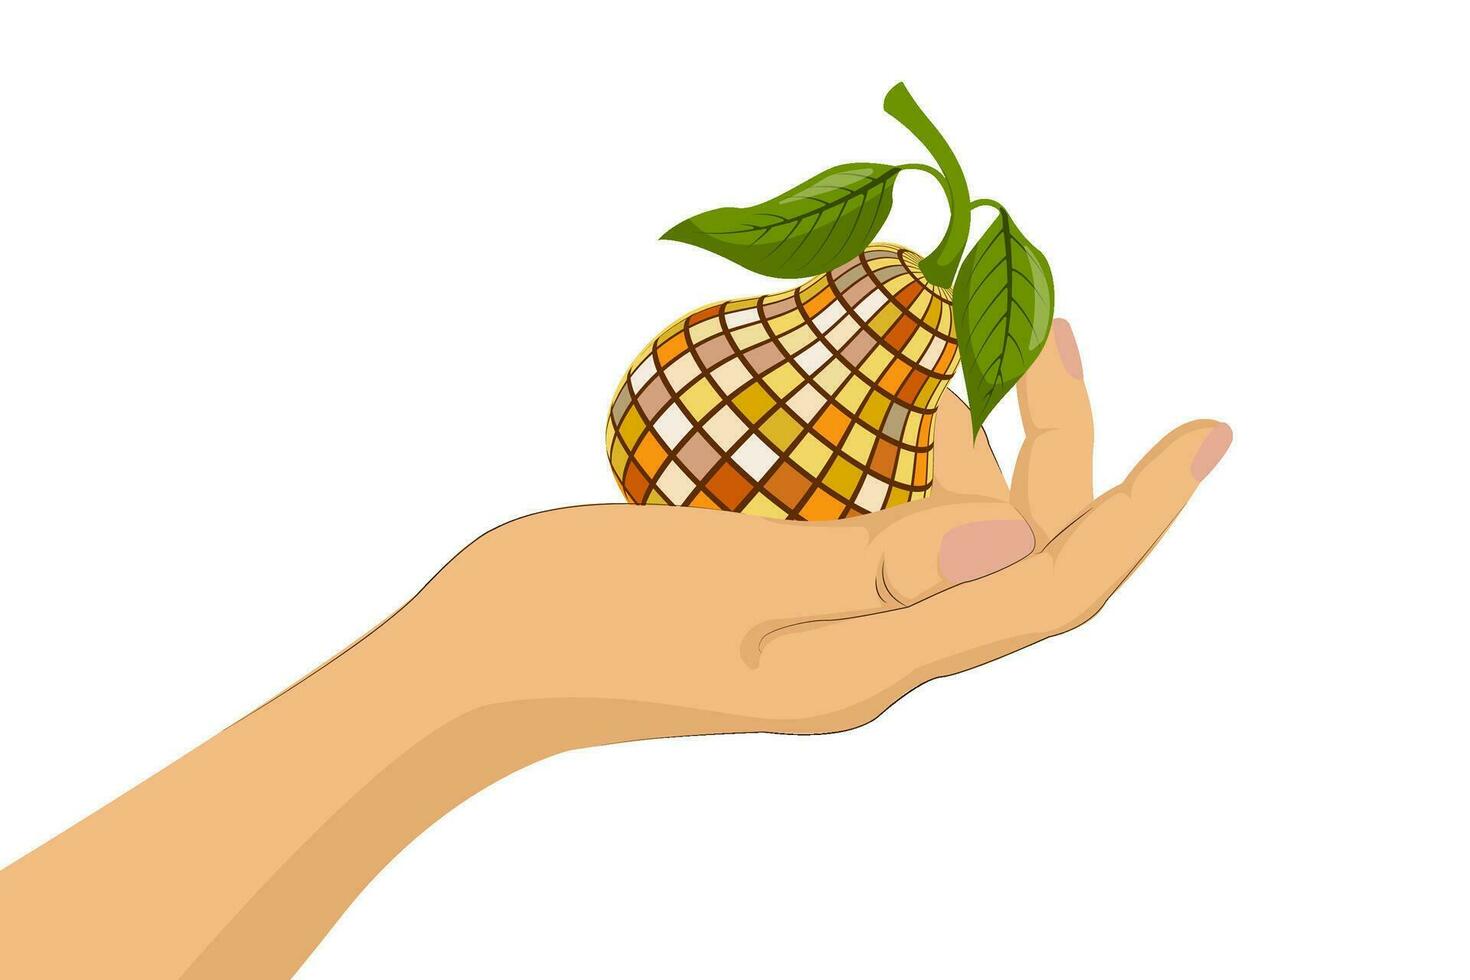 Illustration of a woman's hand tenderly holding a pear. Flat style design. Y2K. Vector illustration